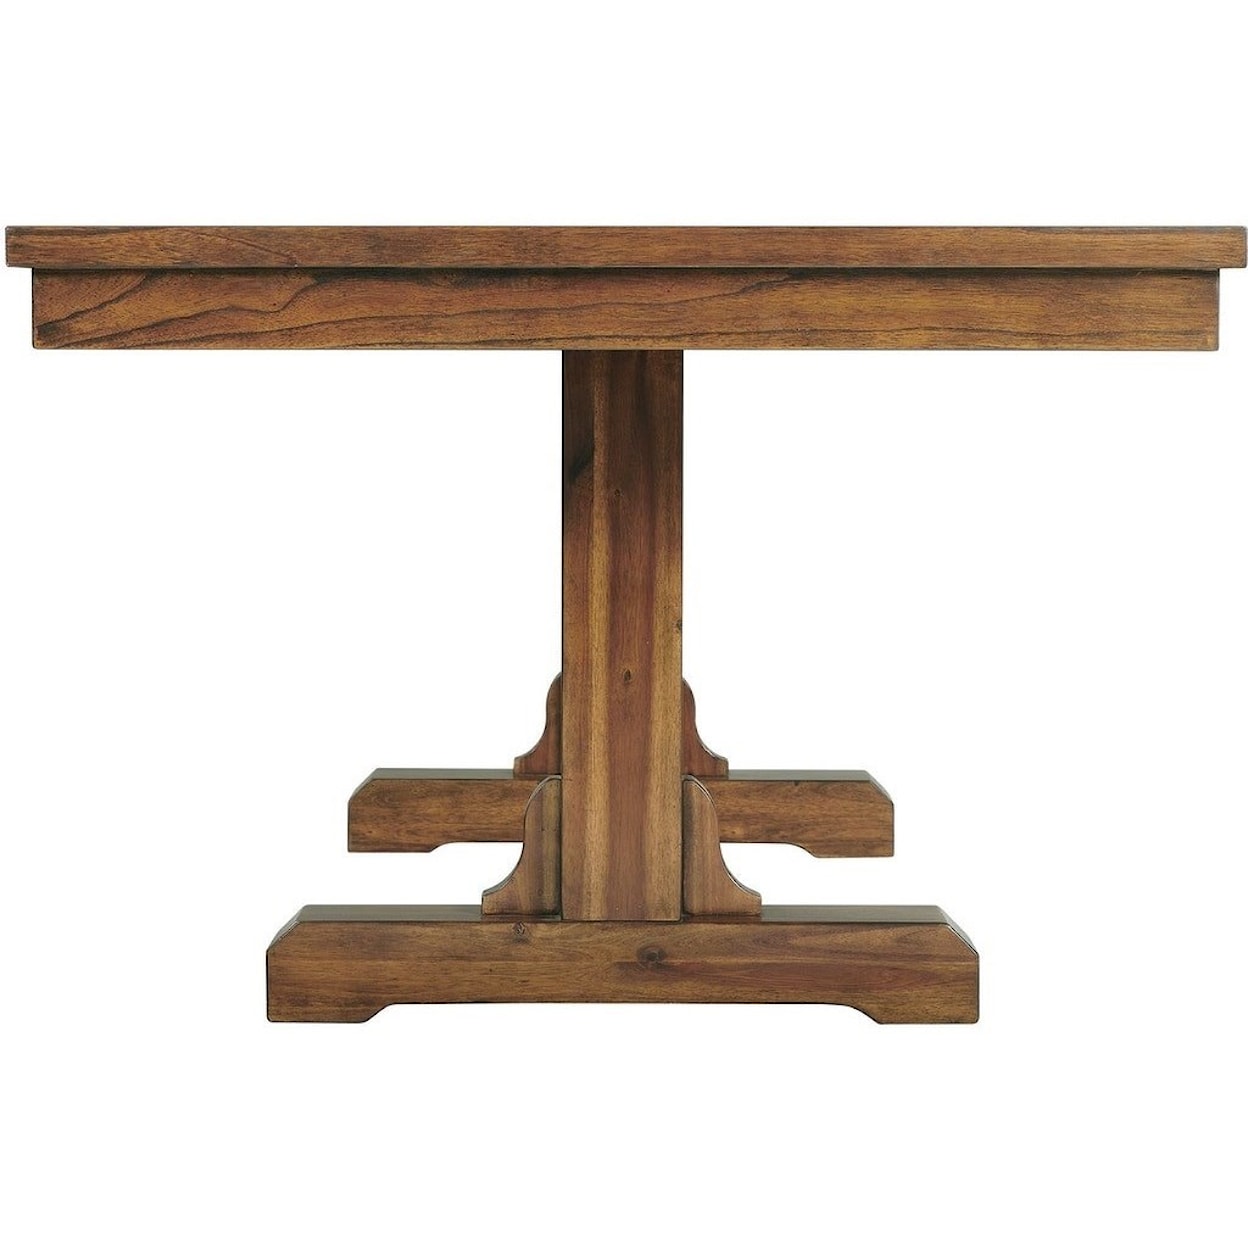 Elements Silas Dining Table